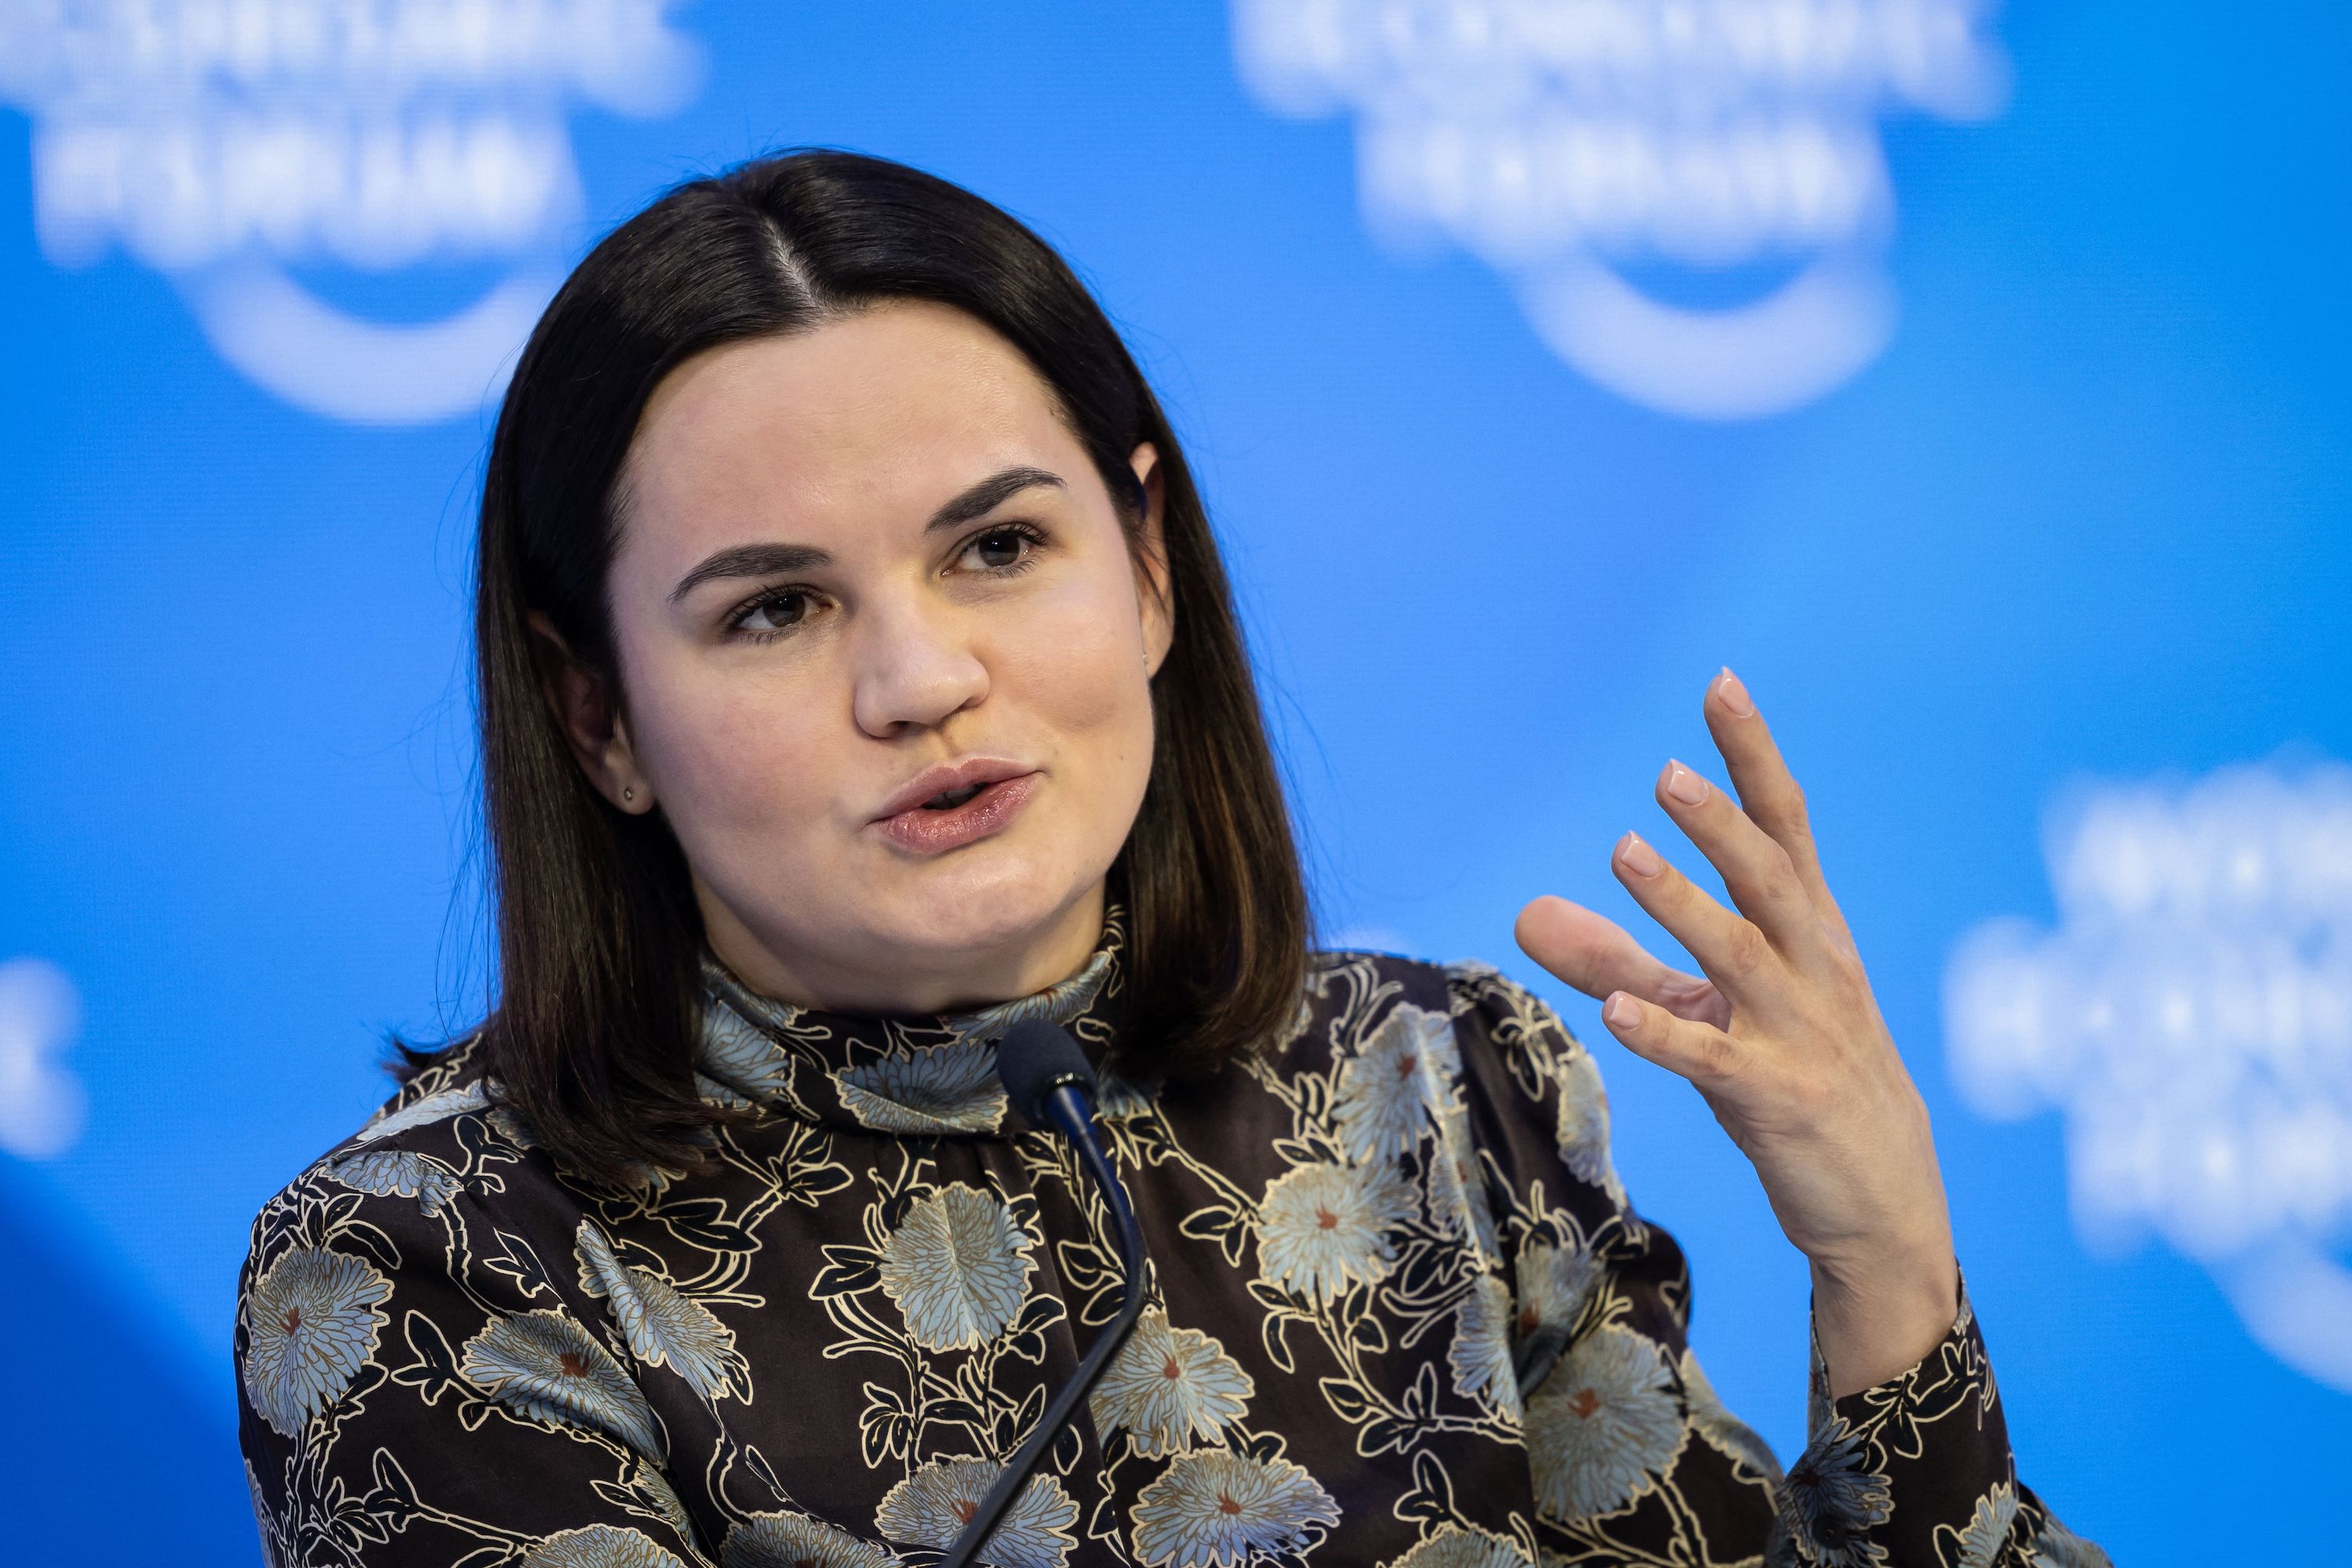 Belarusian opposition leader Sviatlana Tsikhanouskaya, speaks during a session at the Congress centre during the World Economic Forum (WEF) annual meeting in Davos on January 19, 2023.